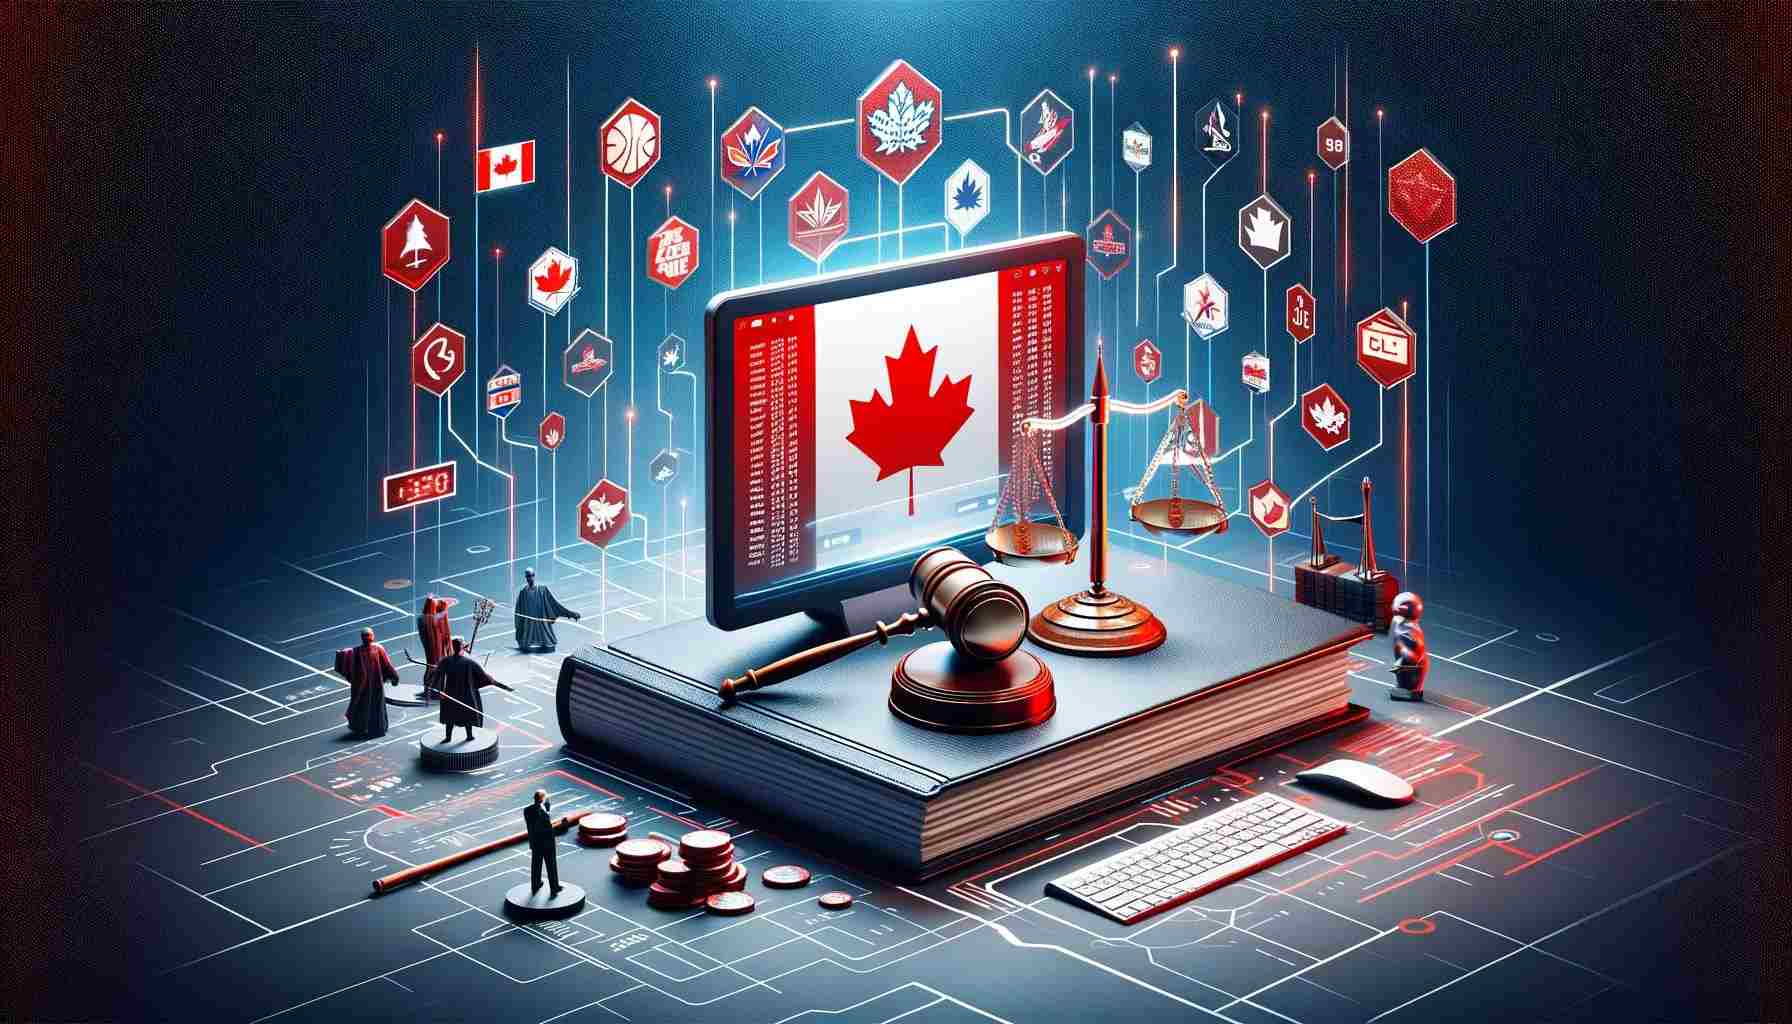 Legal online sports betting in Canada